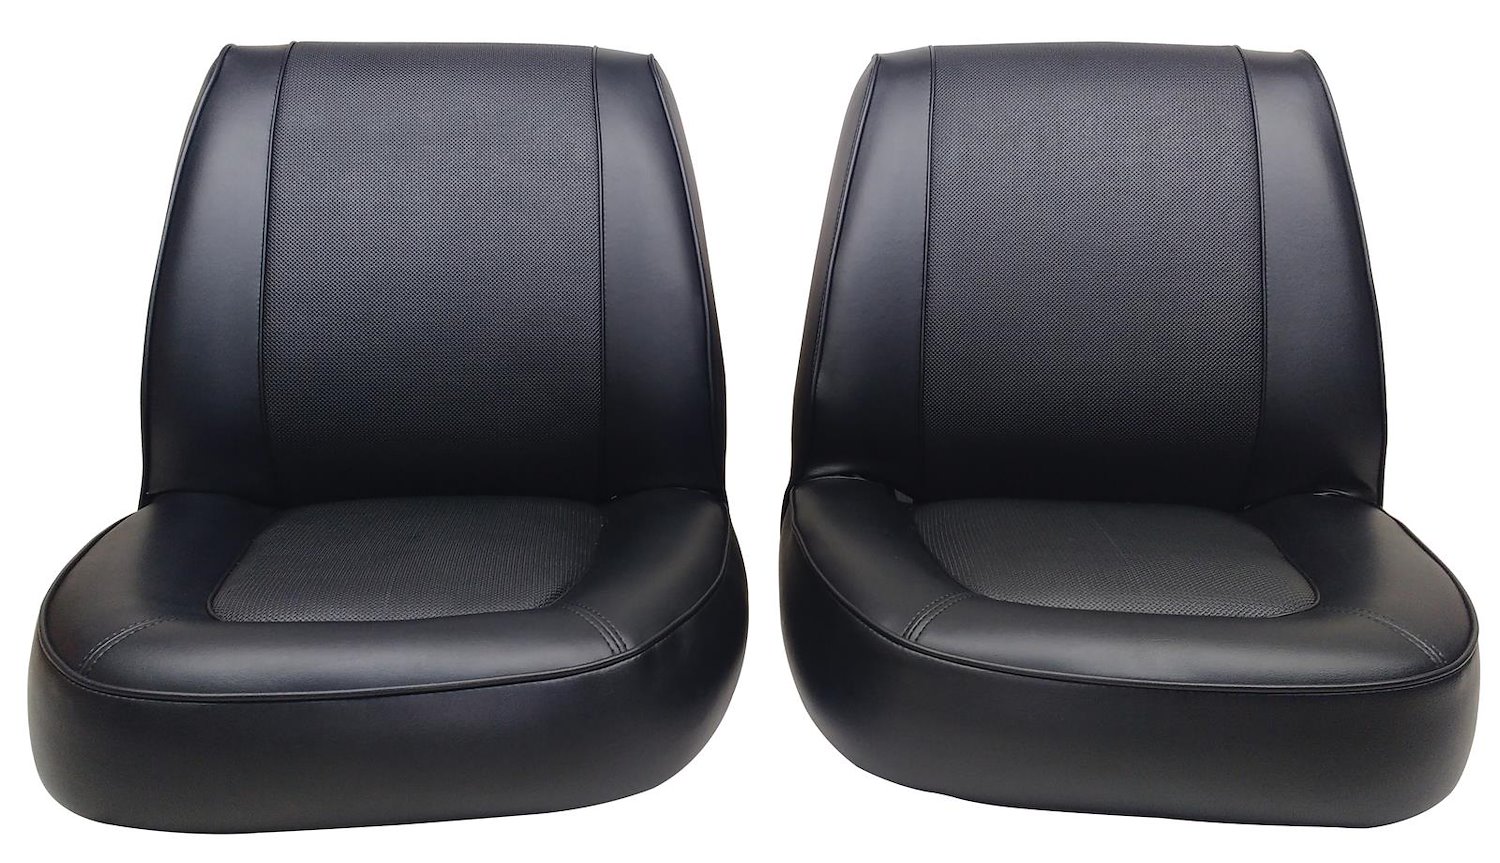 1971-1973 Mercury Cougar XR-7 Interior Front Bucket Seat Upholstery Set